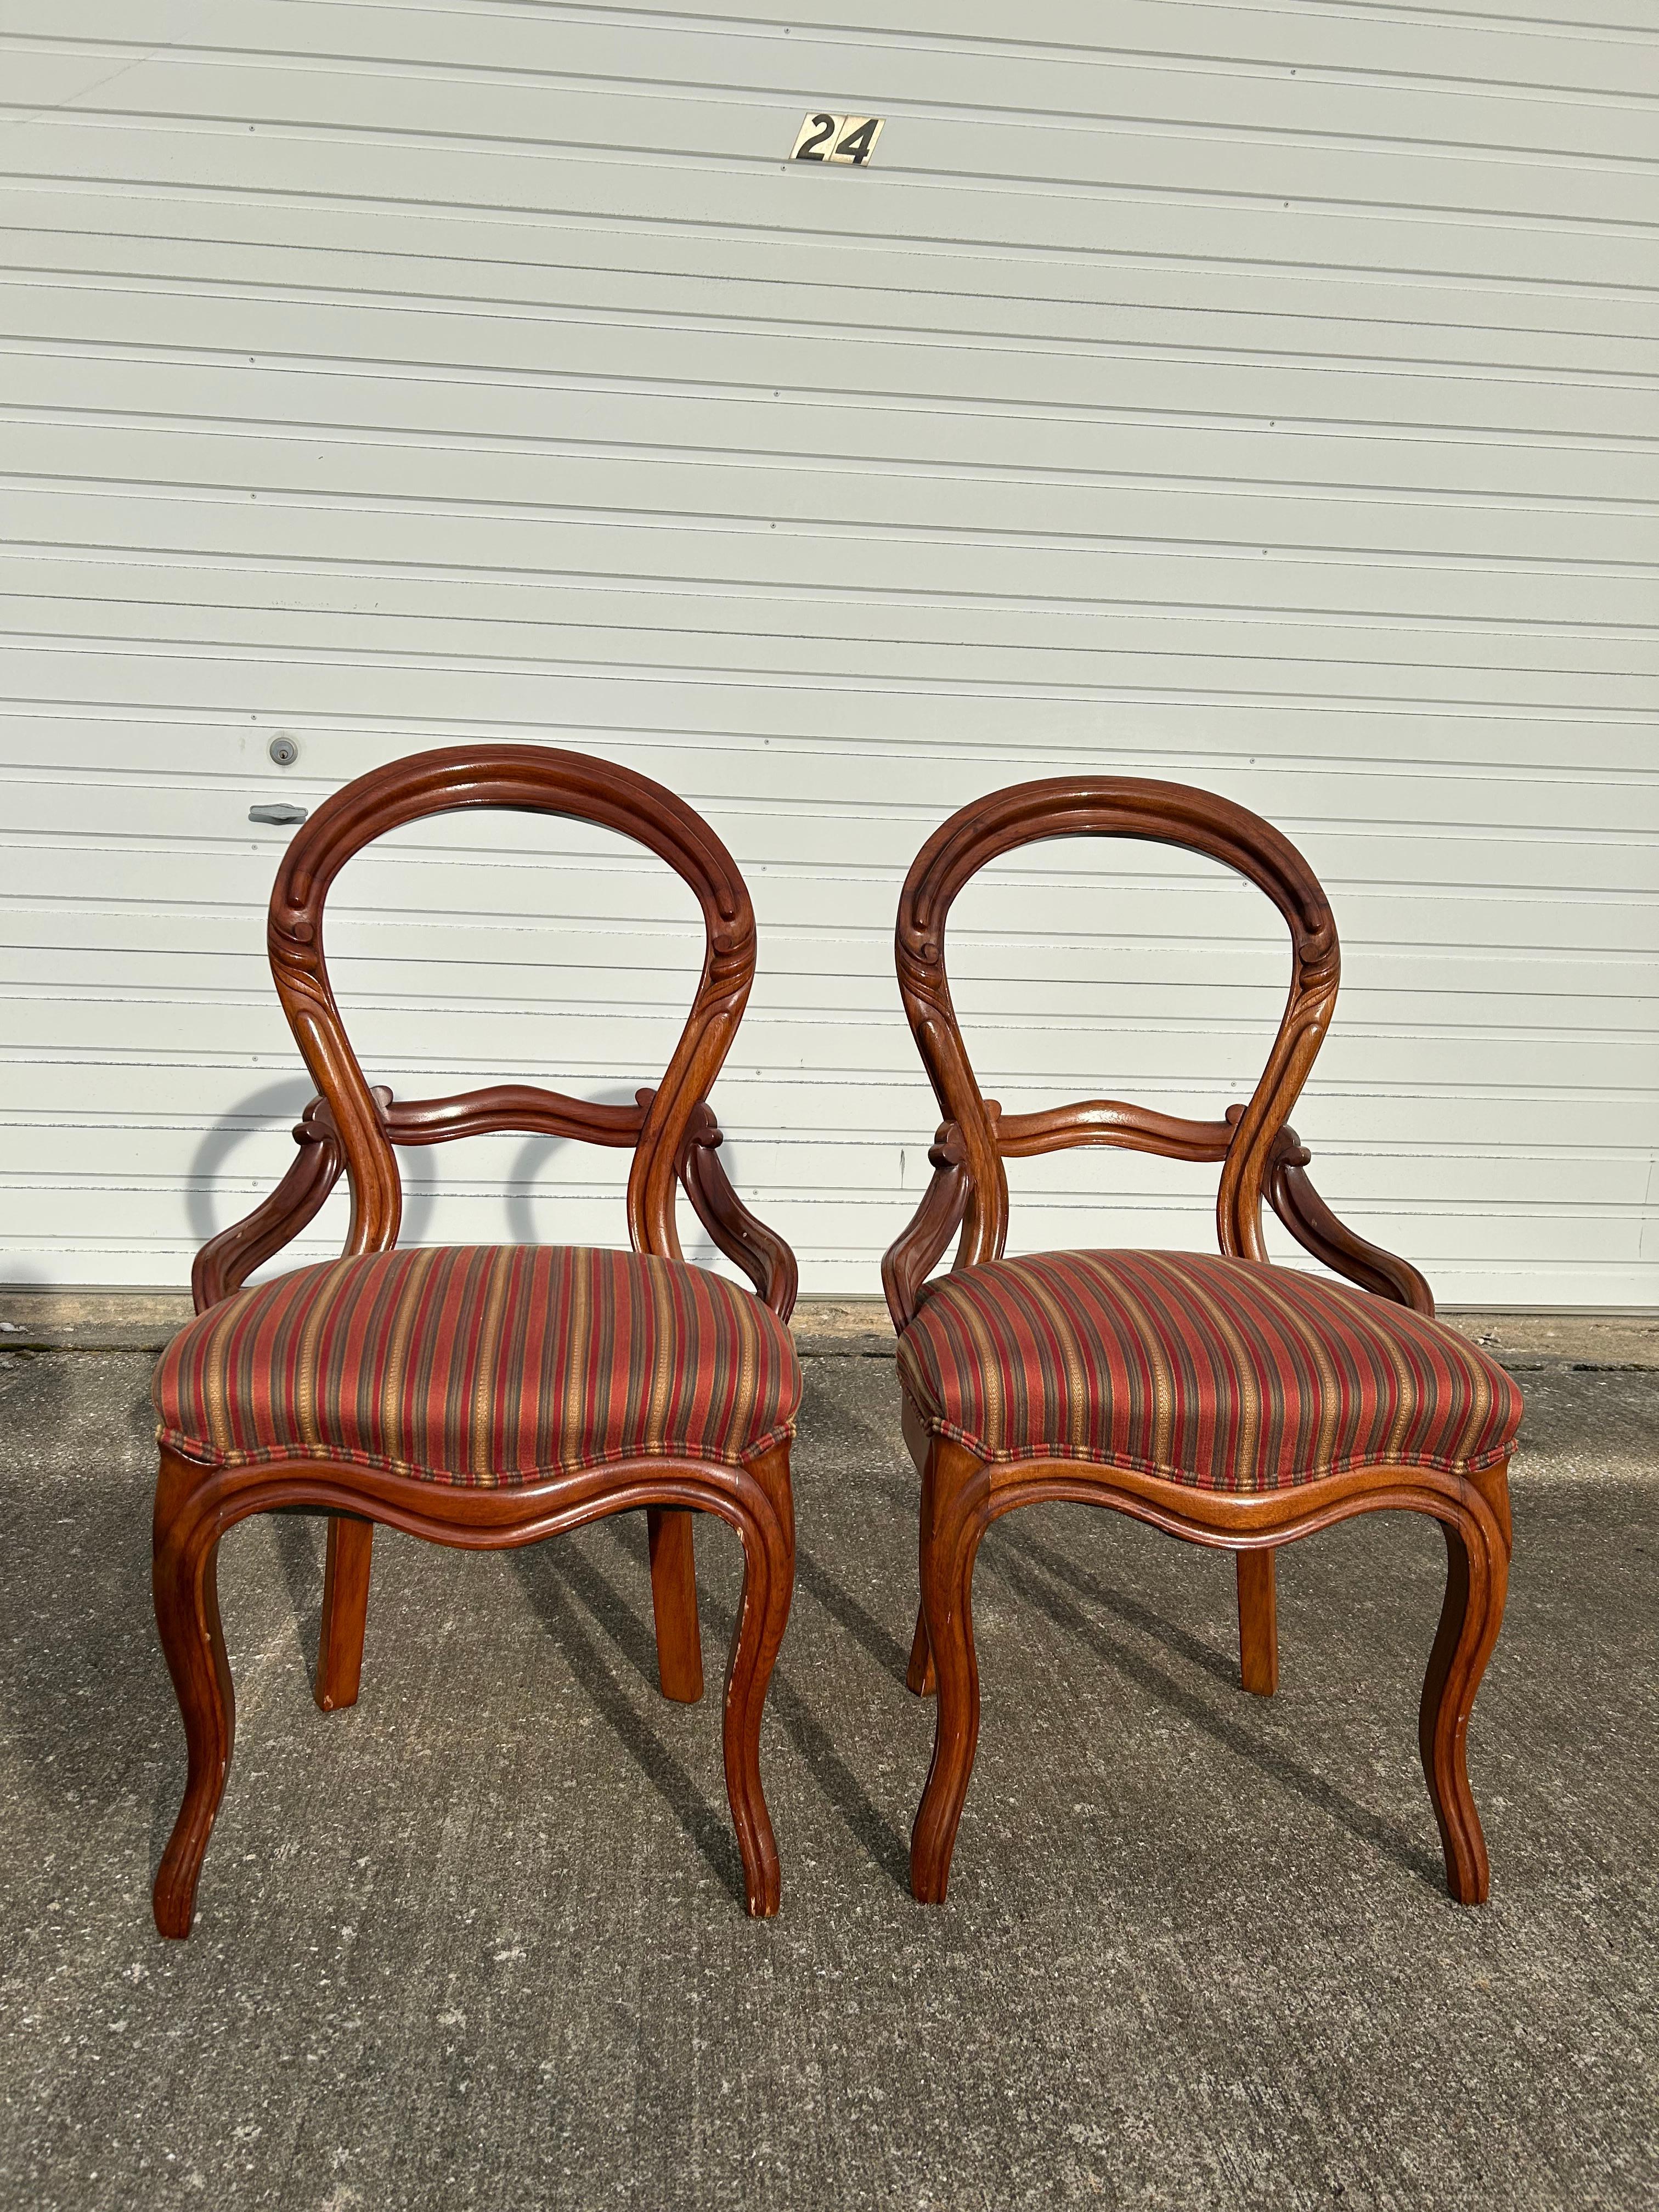 Pair of Early Victorian John Henry Belter Style Side Chairs In Good Condition For Sale In Medina, OH